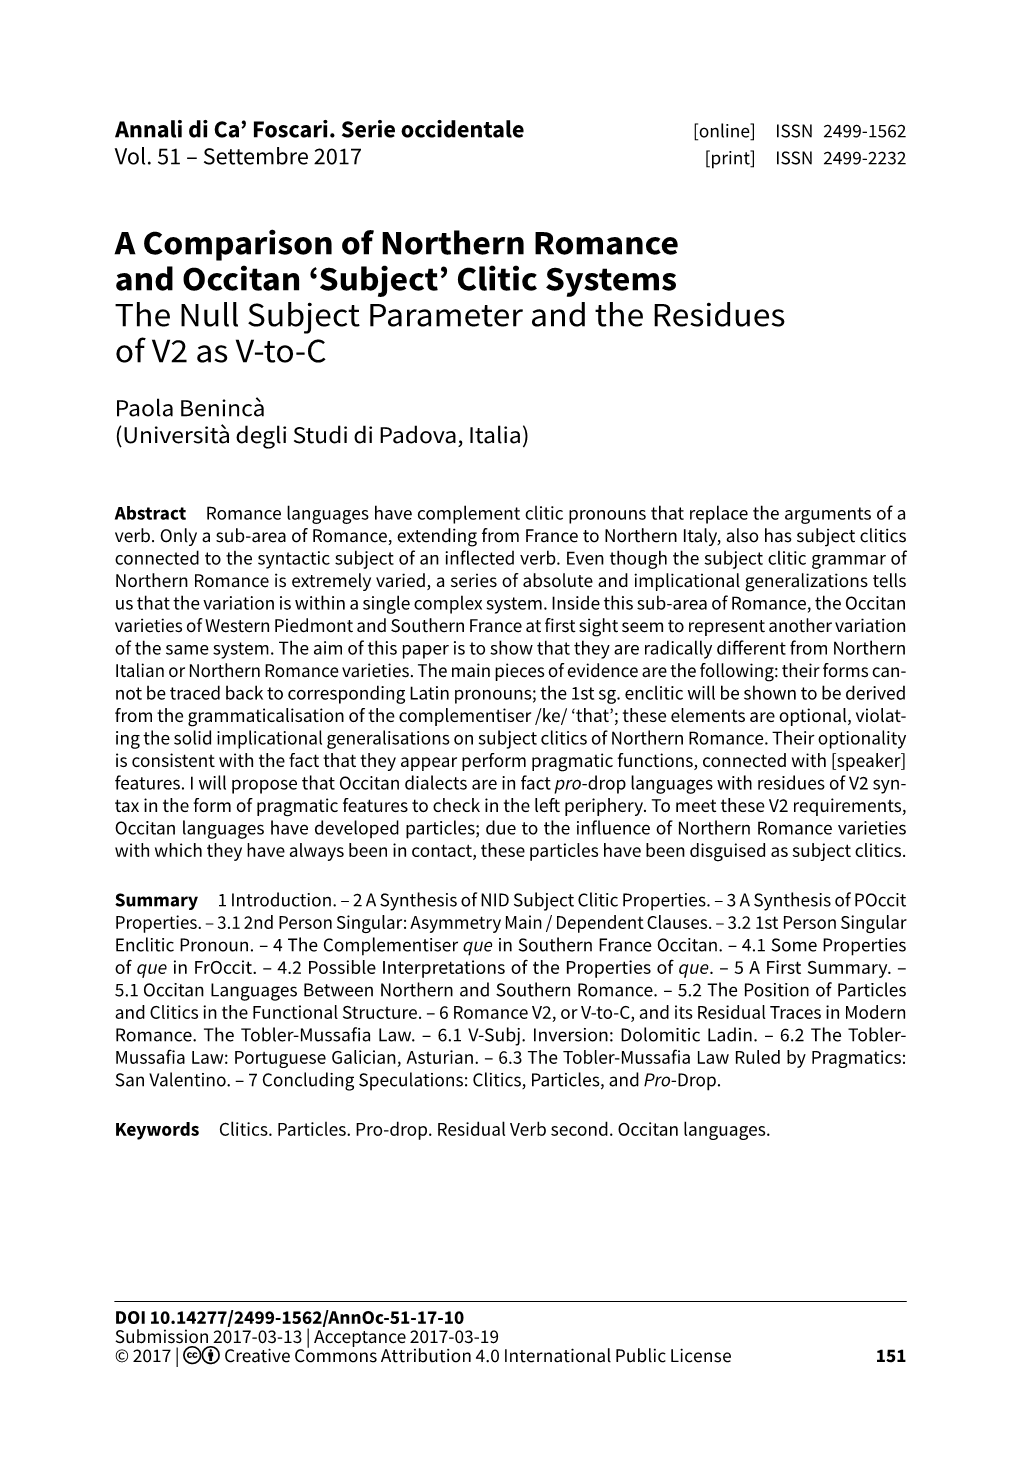 A Comparison of Northern Romance and Occitan 'Subject' Clitic Systems